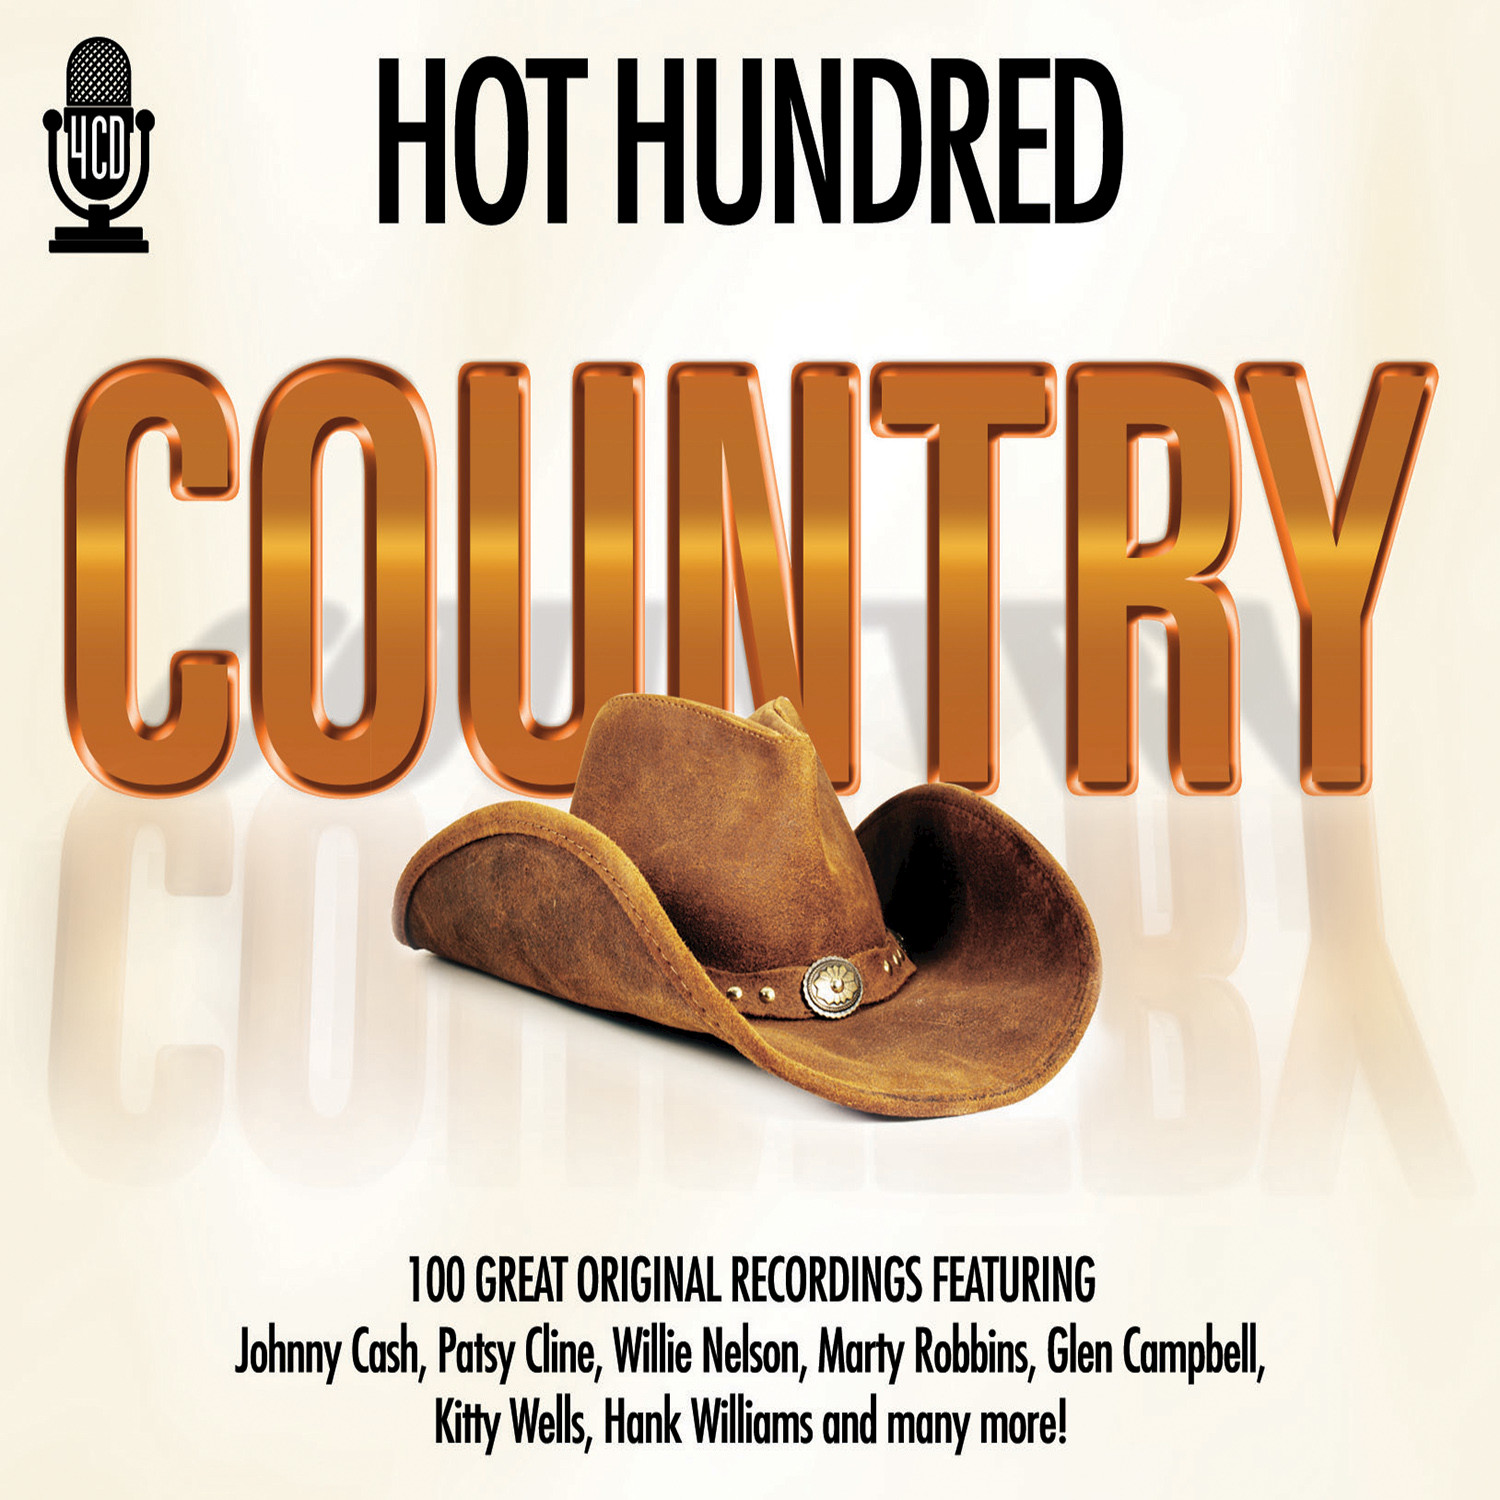 Hot Hundred Country